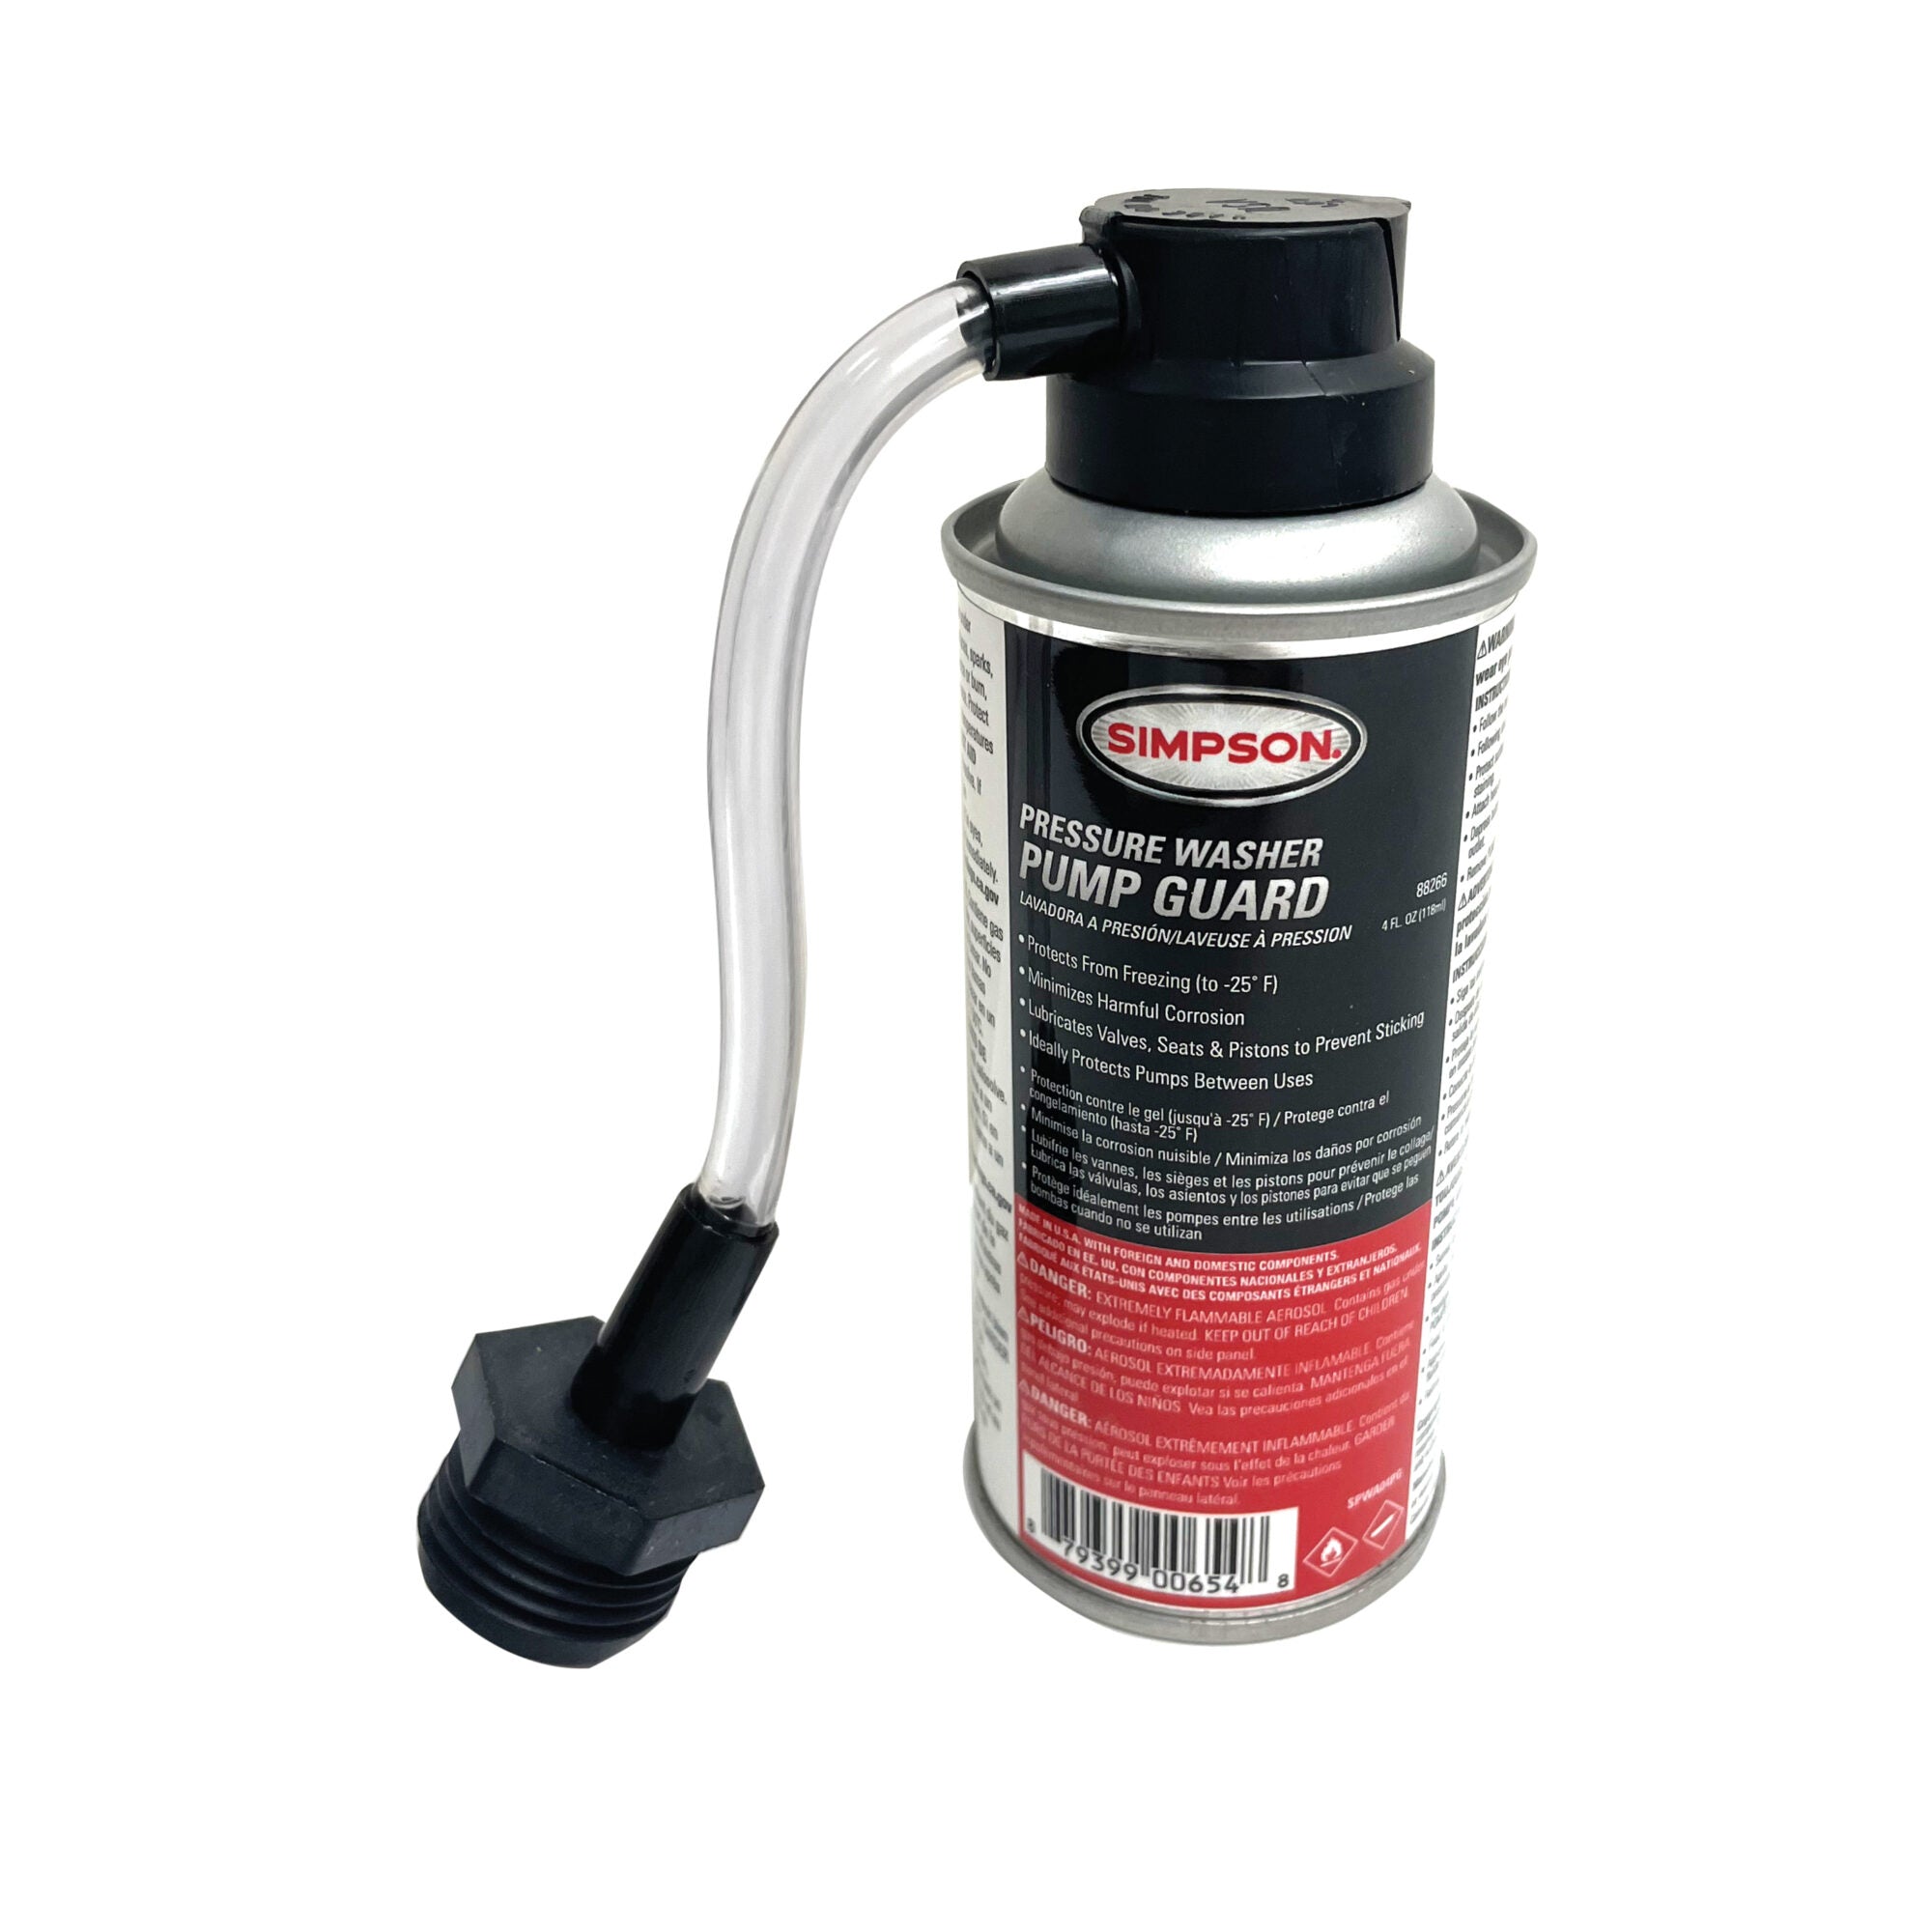 Simpson 88266 Pressure Washer Pump Guard Cleaning Solution